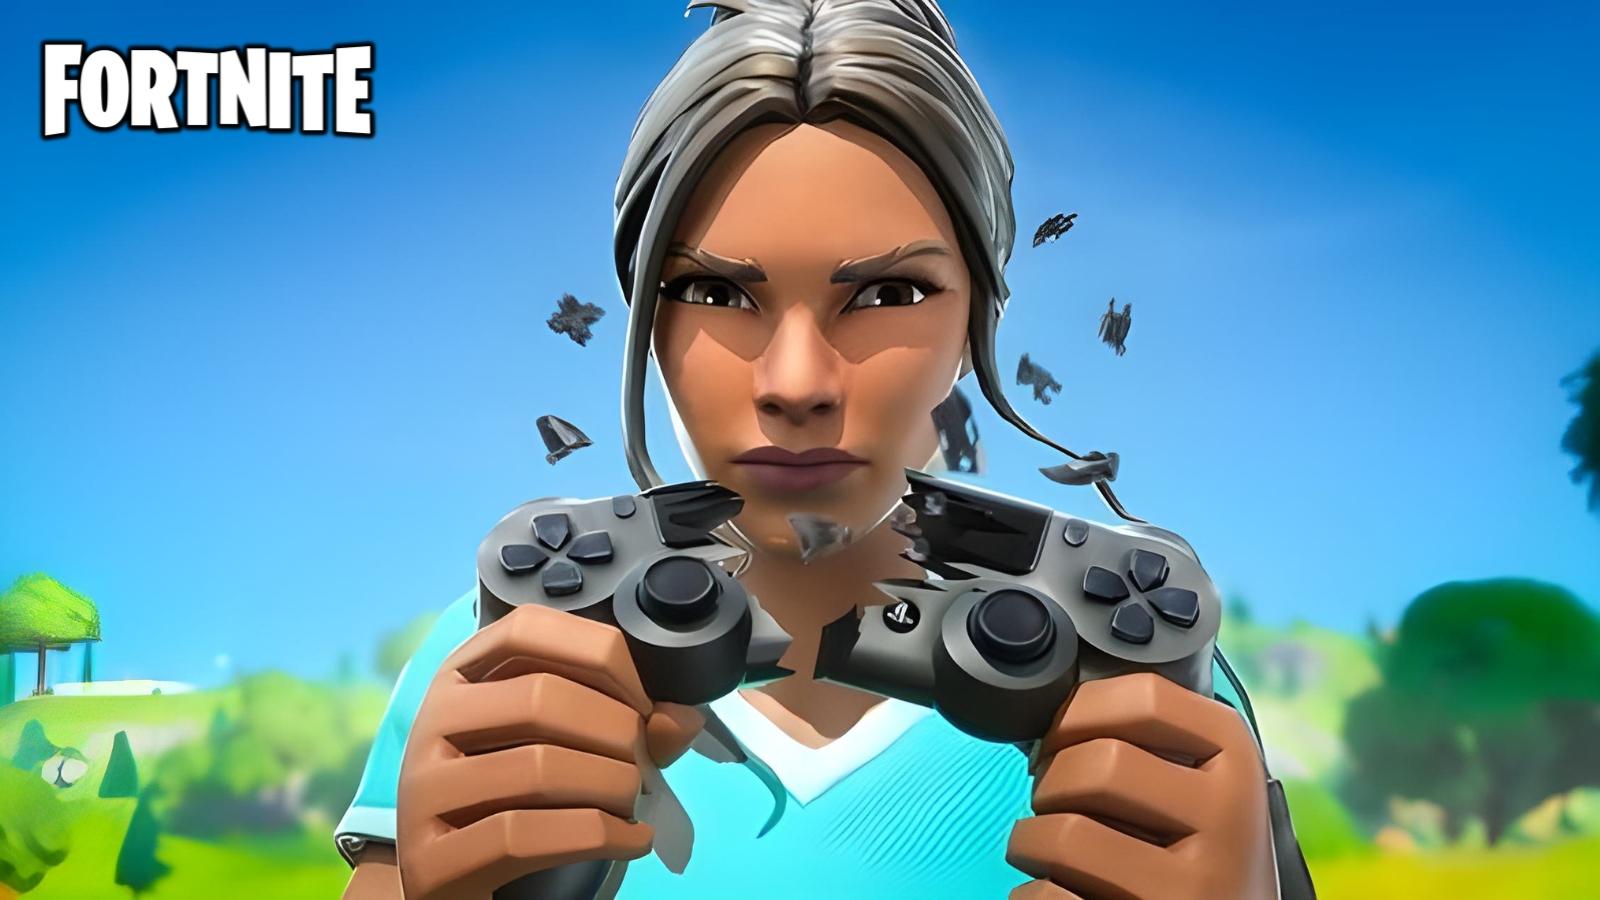 Fortnite player angry breaking controller